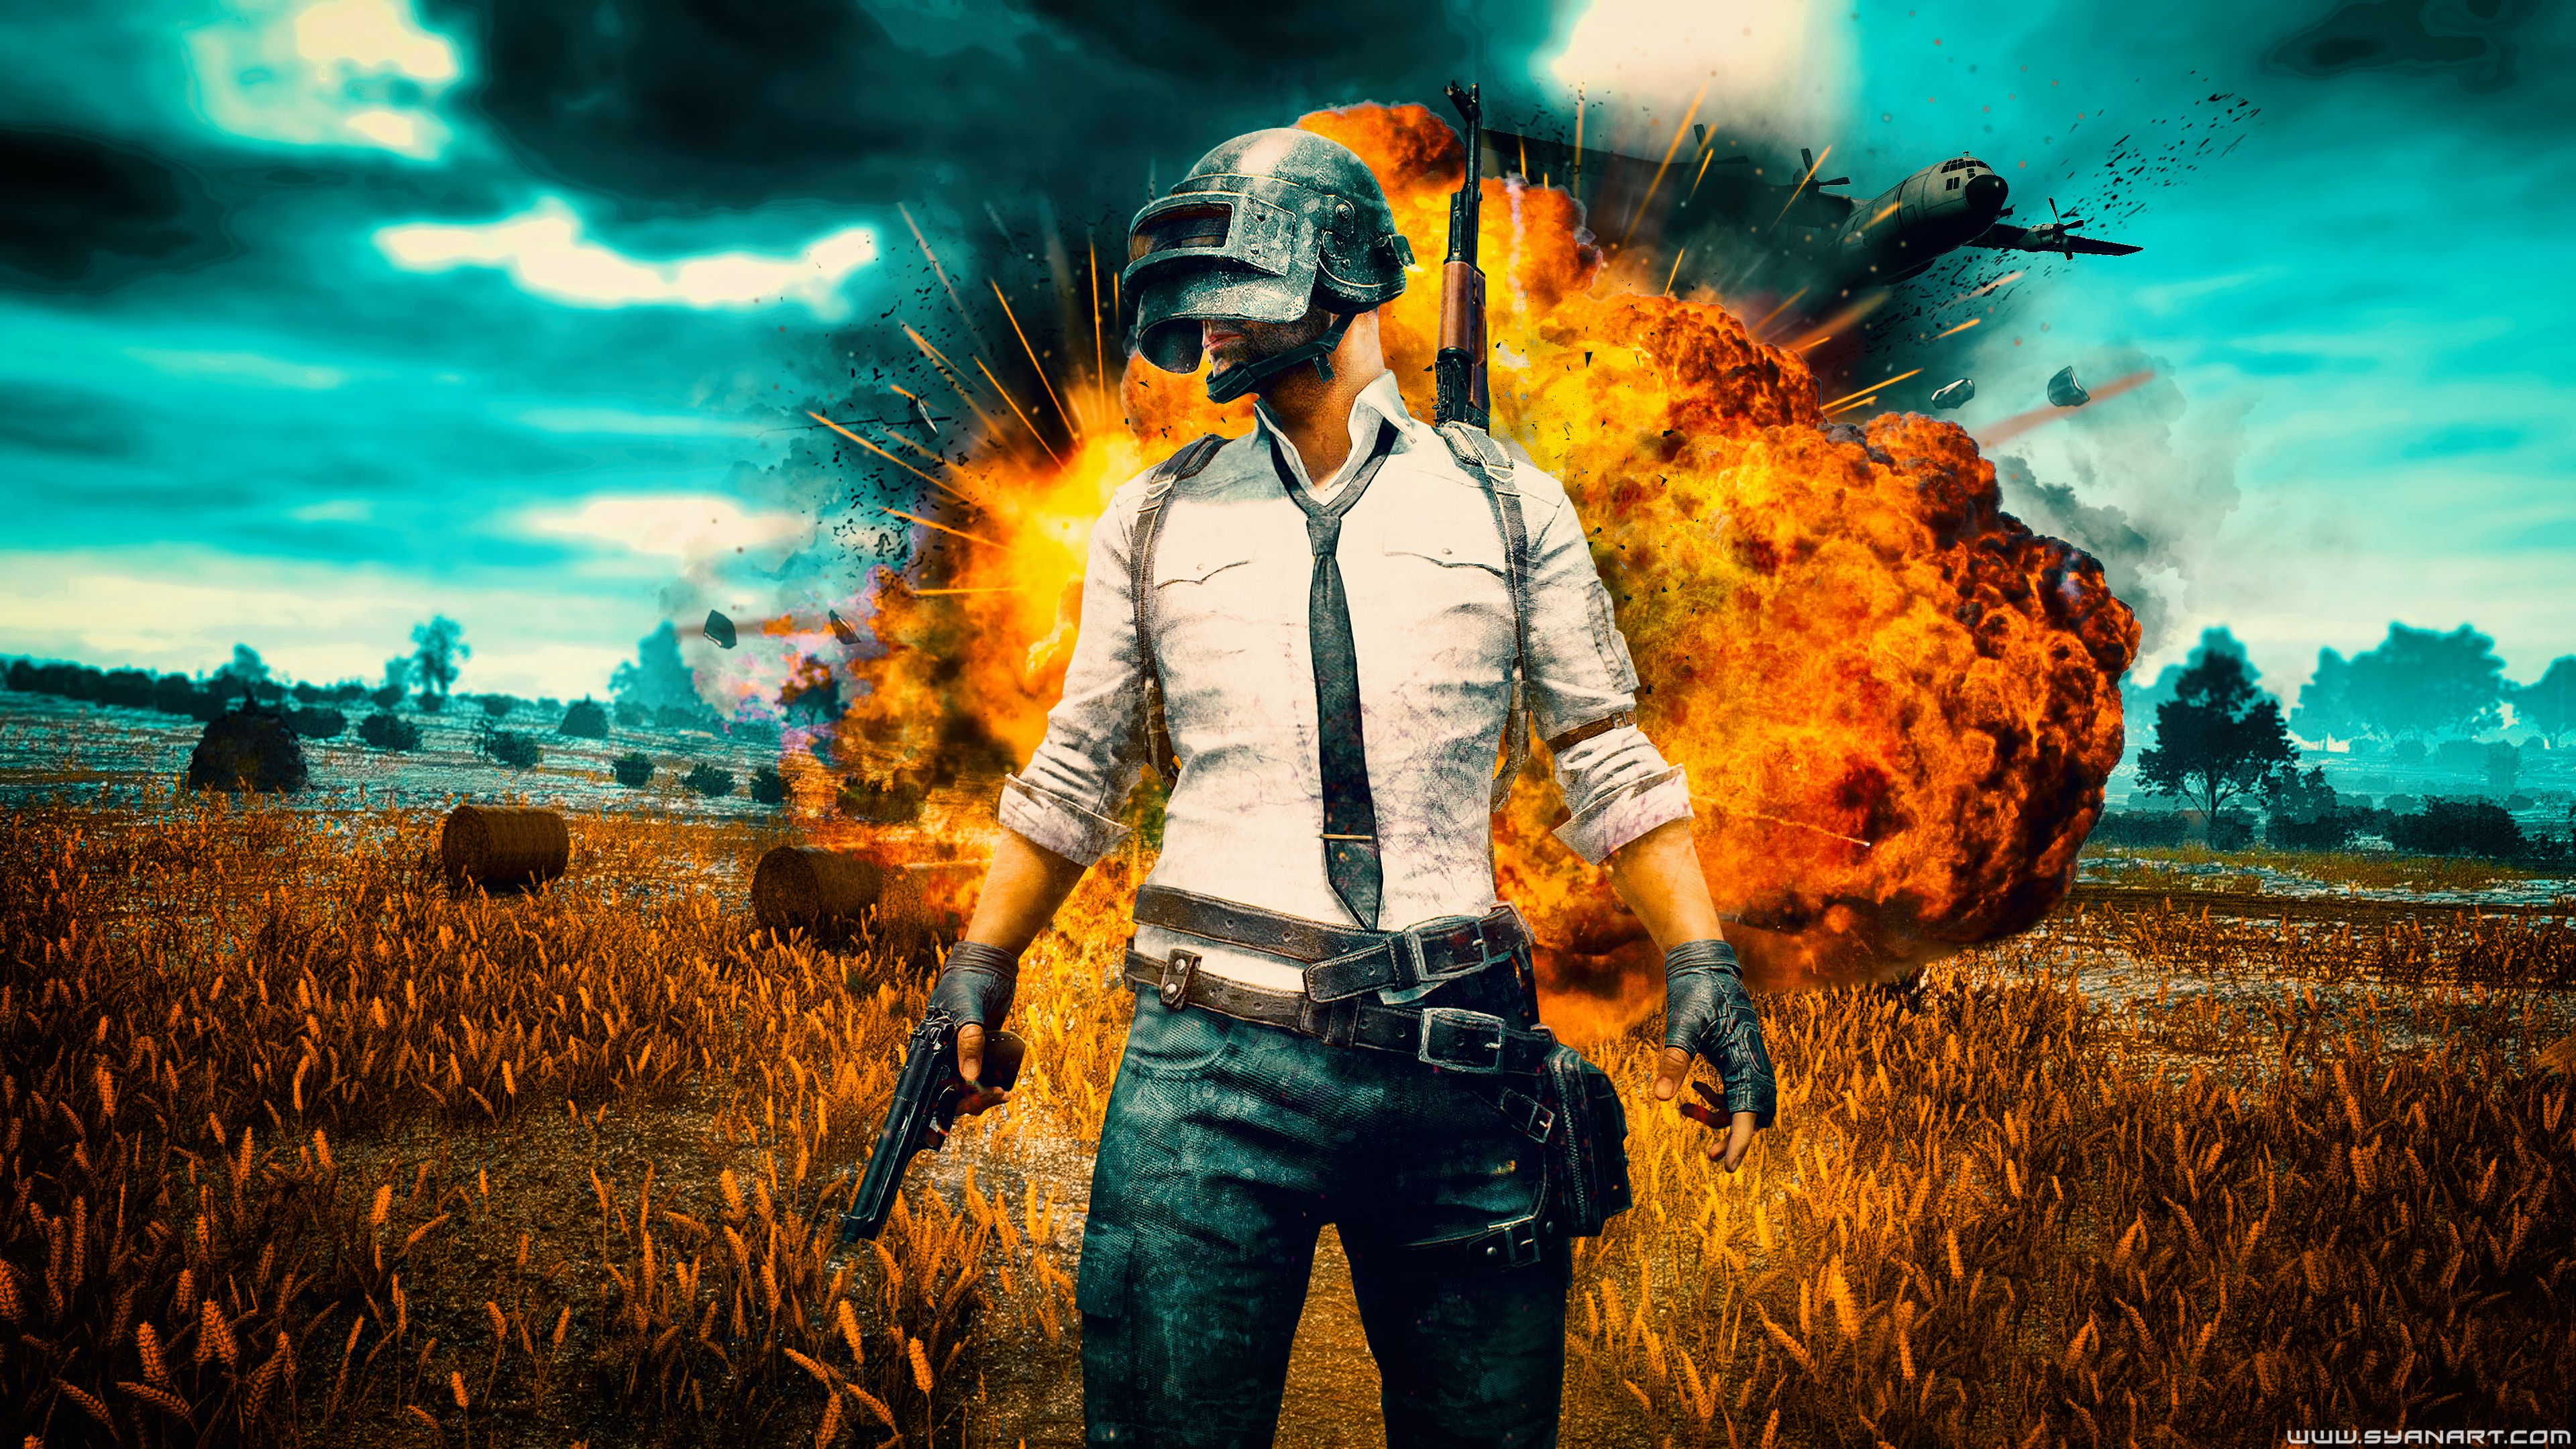 Featured image of post 1440P Pubg 4K Wallpaper Hd / Download pubg playerunknowns battlegrounds 4k wallpaper from the above hd widescreen 4k 5k 8k ultra hd resolutions for desktops laptops, notebook, apple iphone &amp; ipad, android mobiles &amp; tablets.